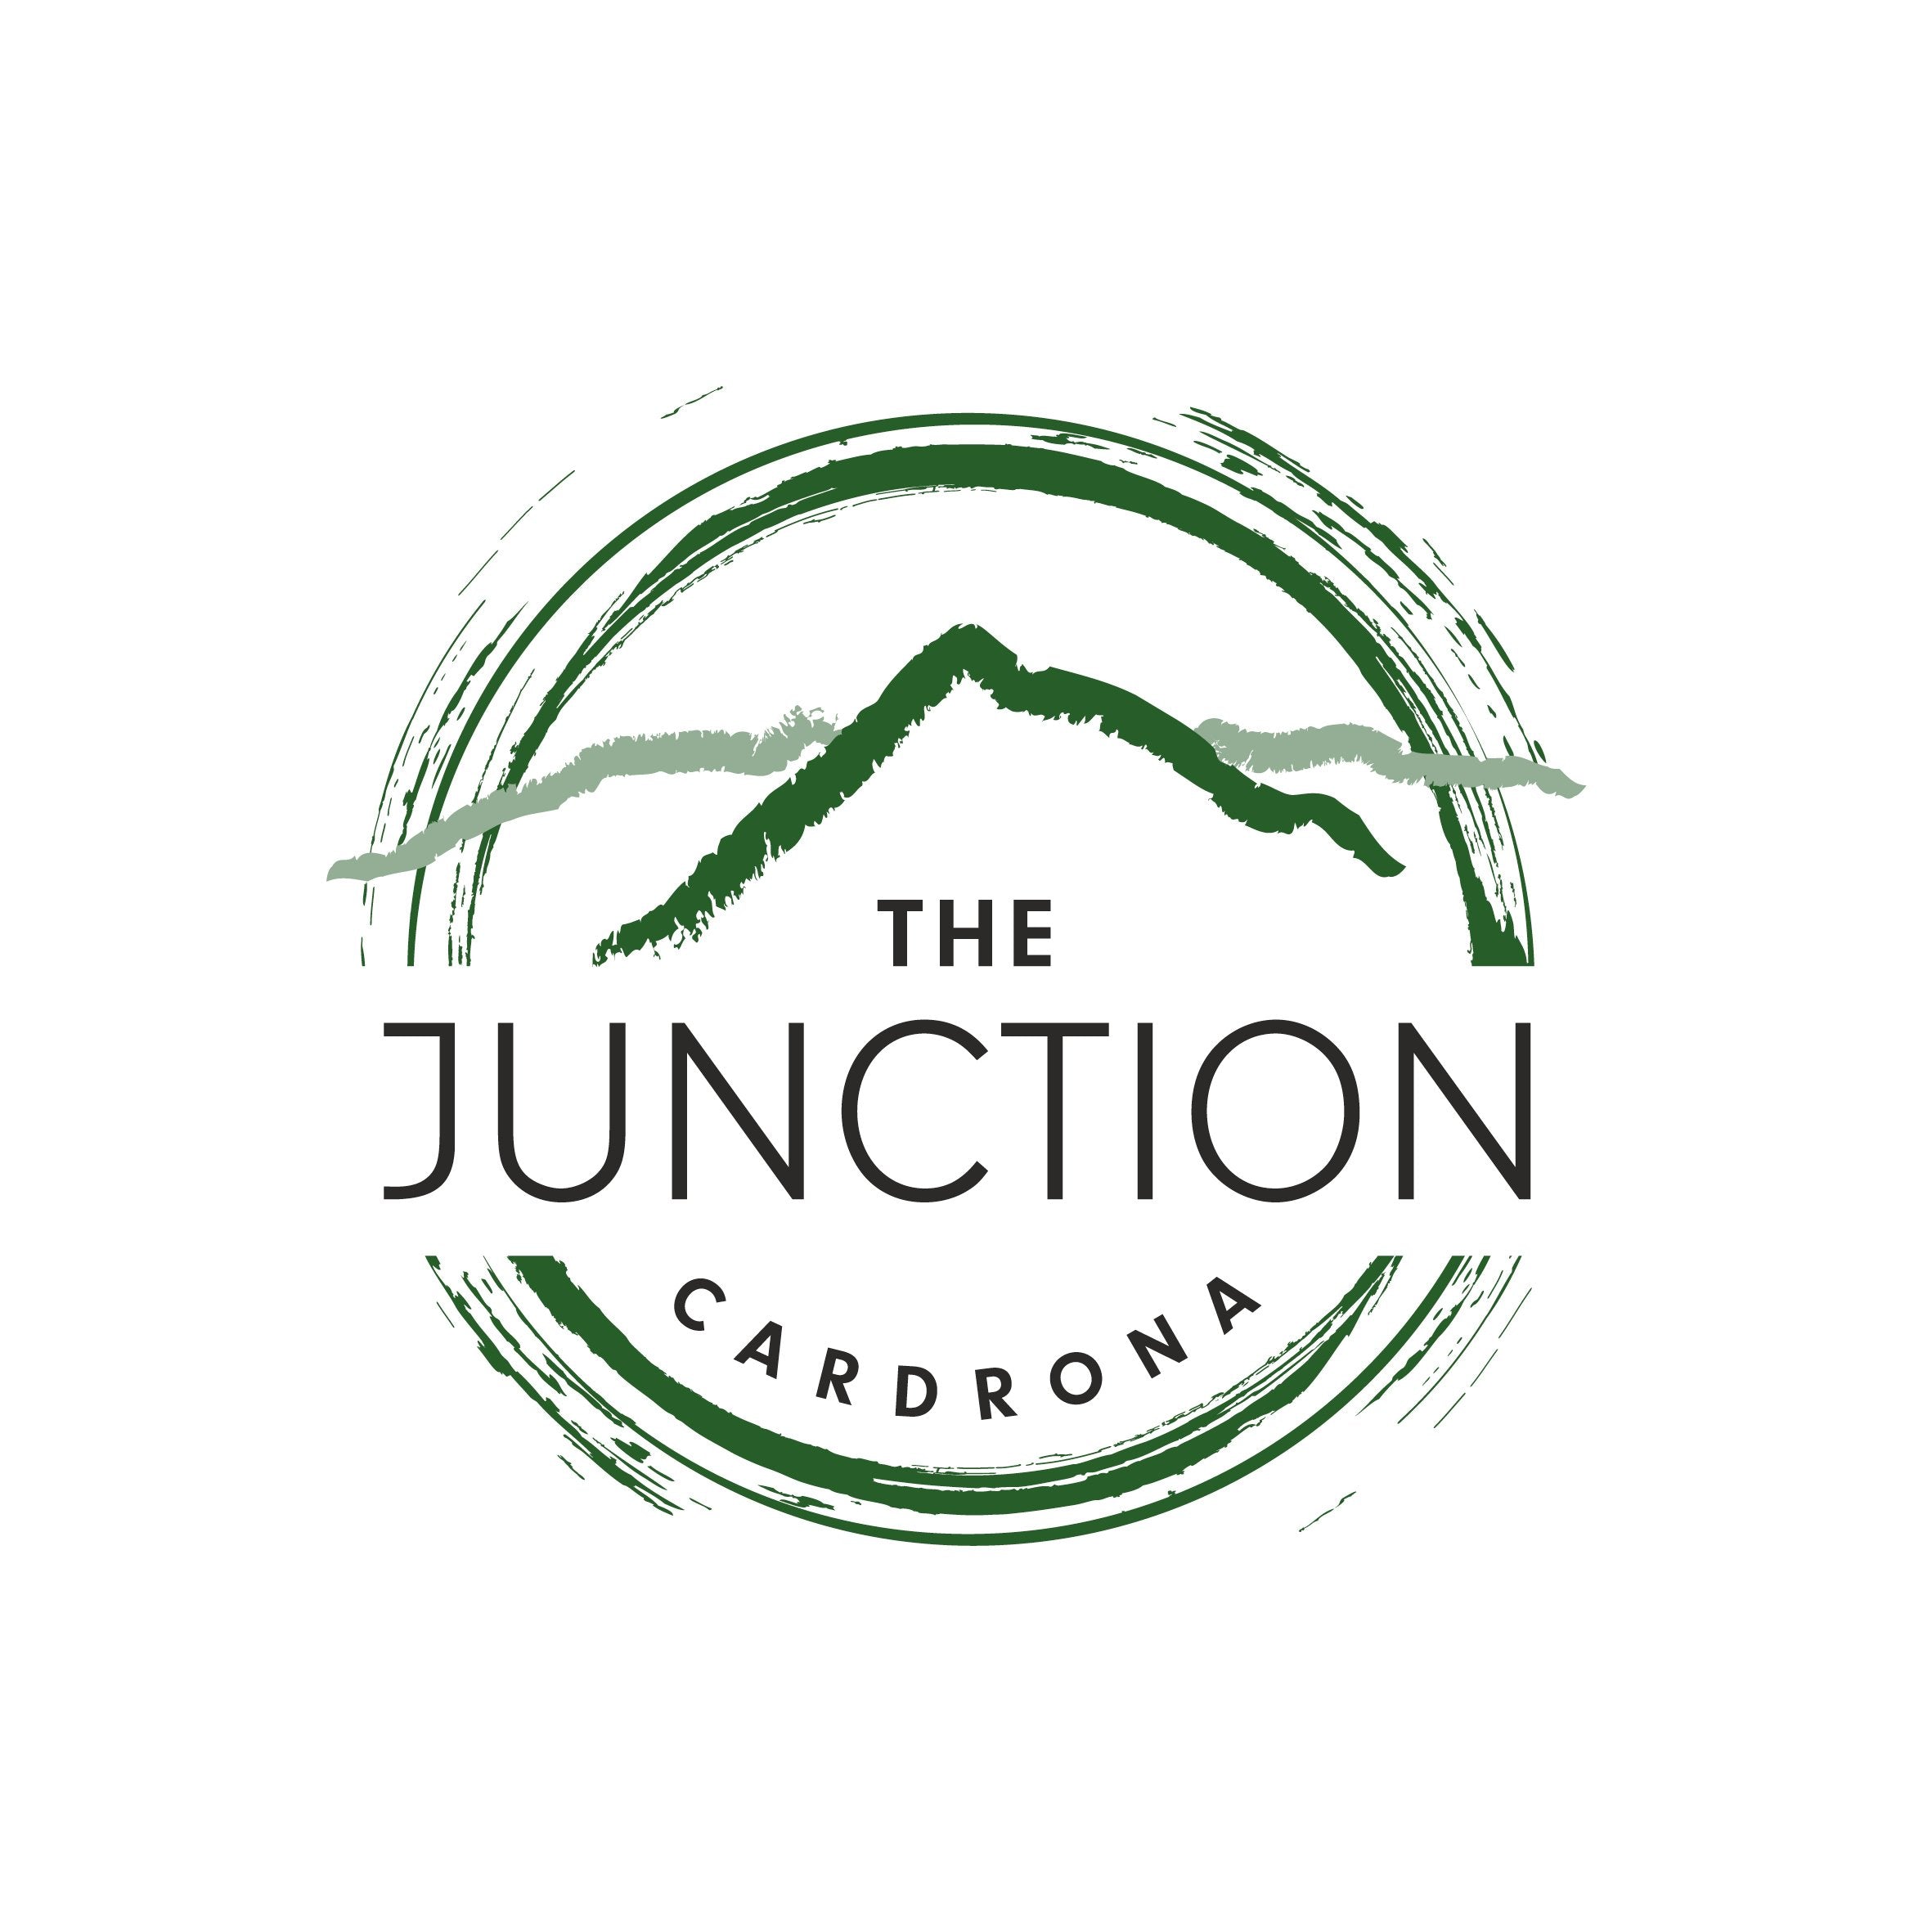 The Junction Cardrona